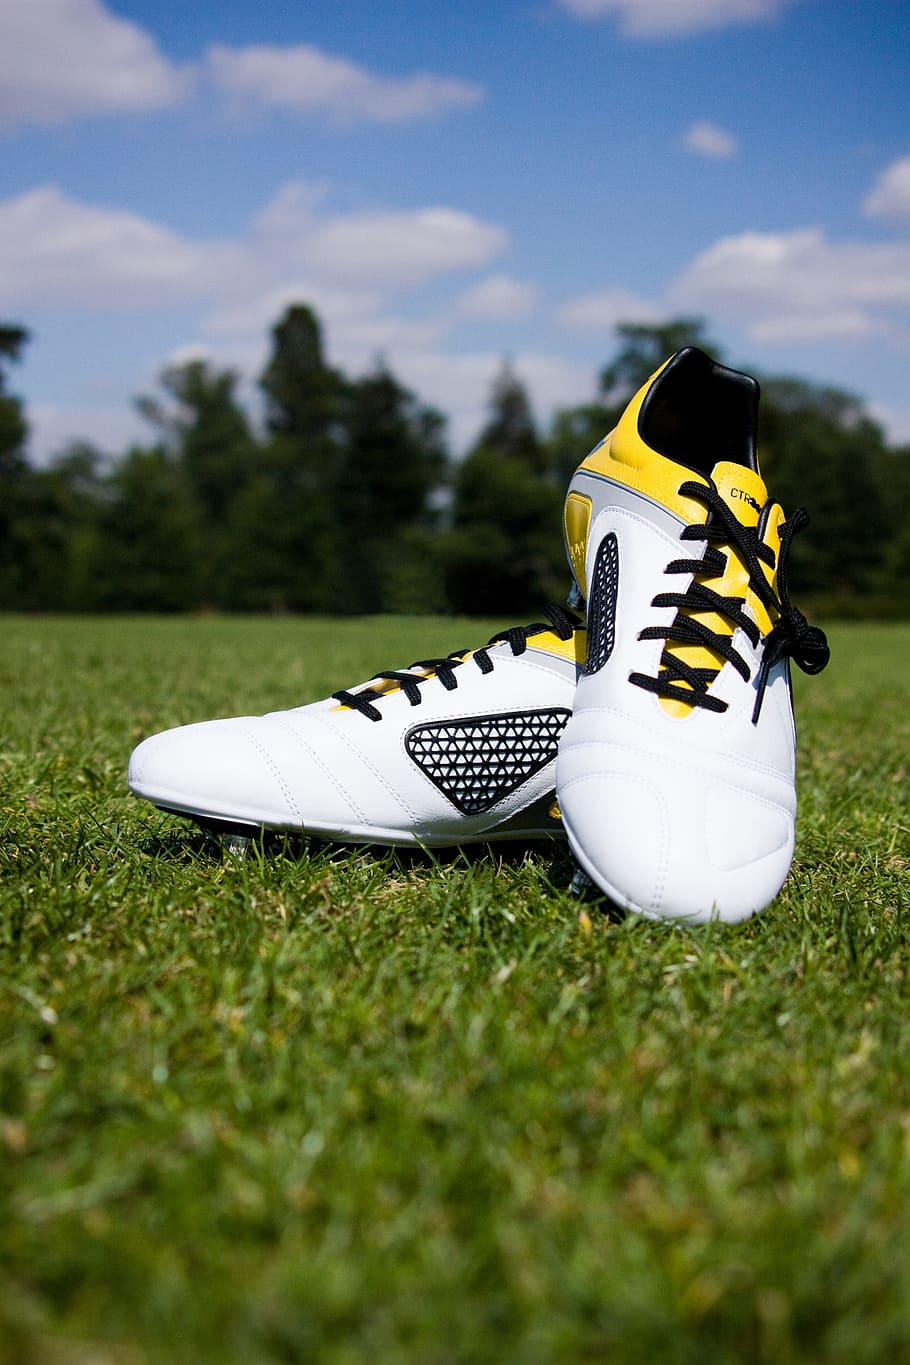 pair, white-and-yellow cleats, green, grass, Football, Boots, Shoes, Sport, Field, football, boots